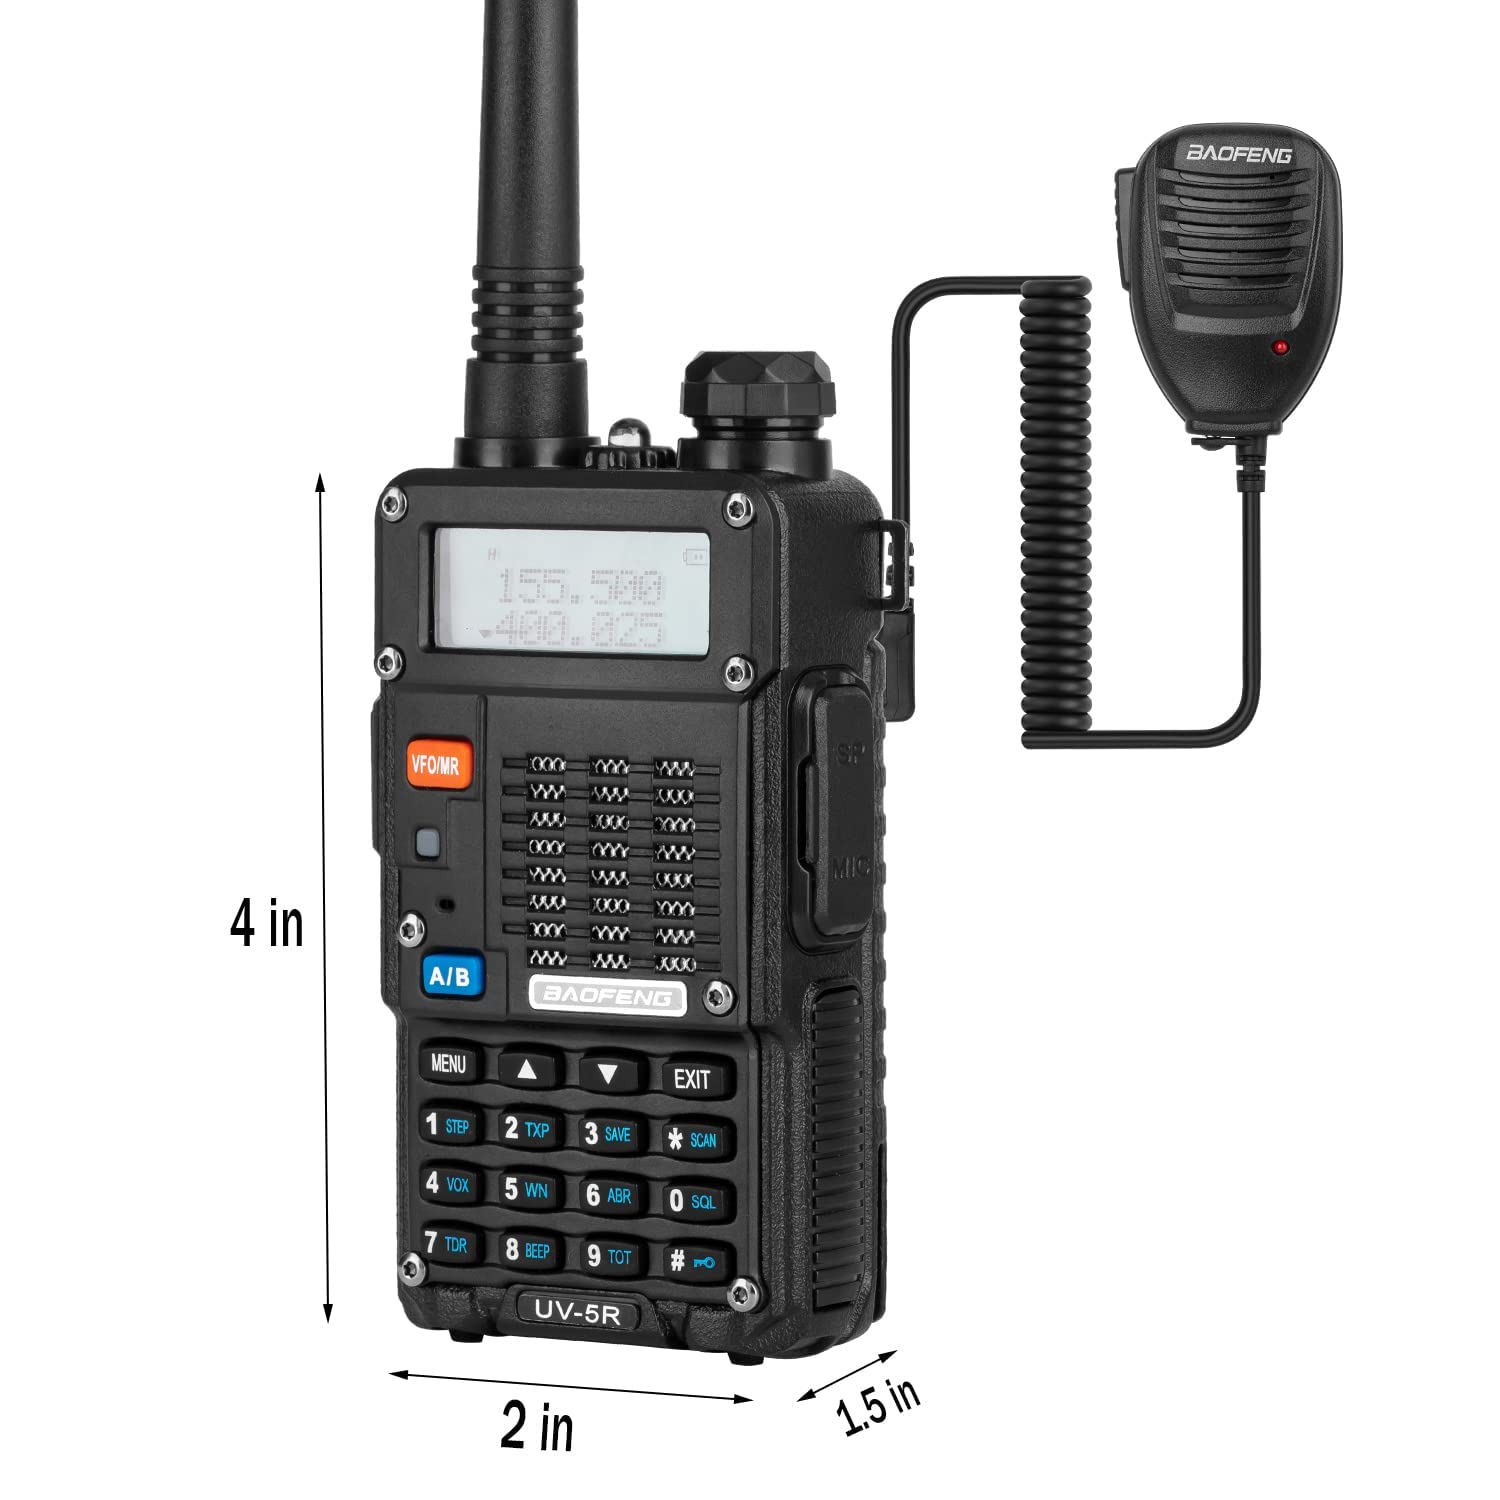 BAOFENG Ham Radio, UV-5R Pro 8W Walkie Talkies, Handheld Dual Band Two Way Ham Radios Long Range with Rechargeable Battery, Earpieces, Mic, Antenna and Programming Cable (2 Pack)